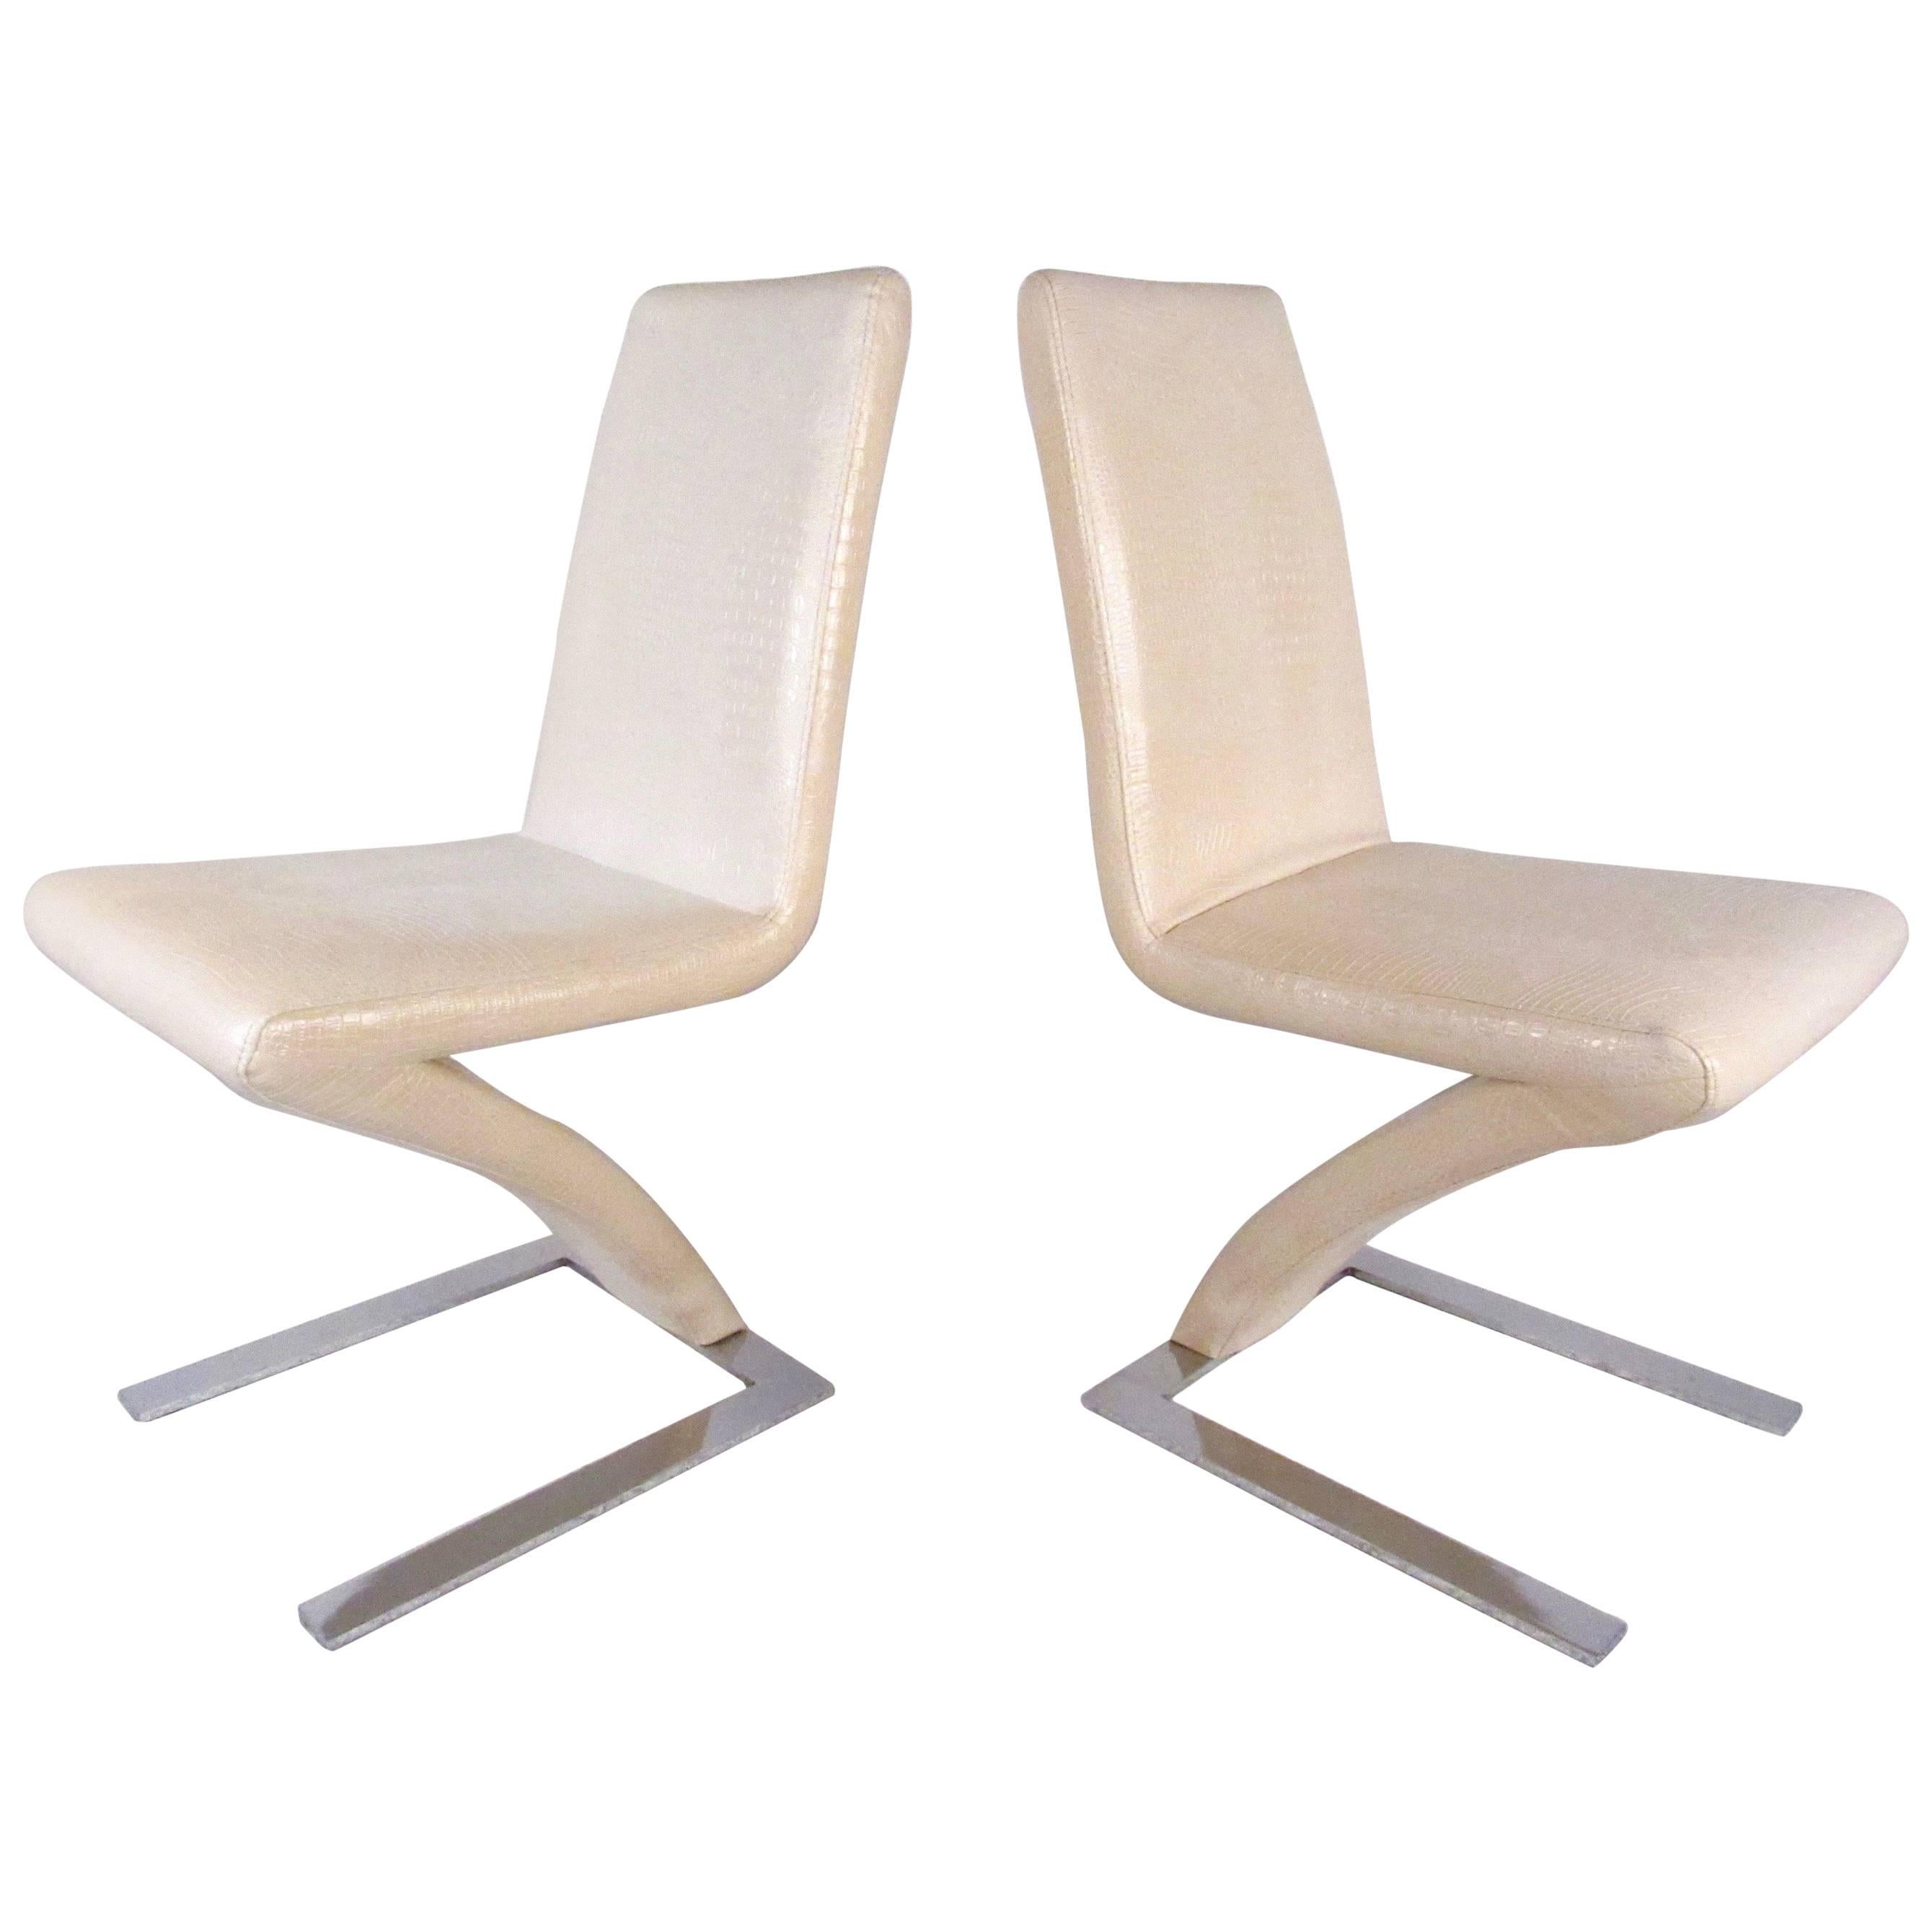 Pair of Modern Verner Panton Style Cantilever Chairs